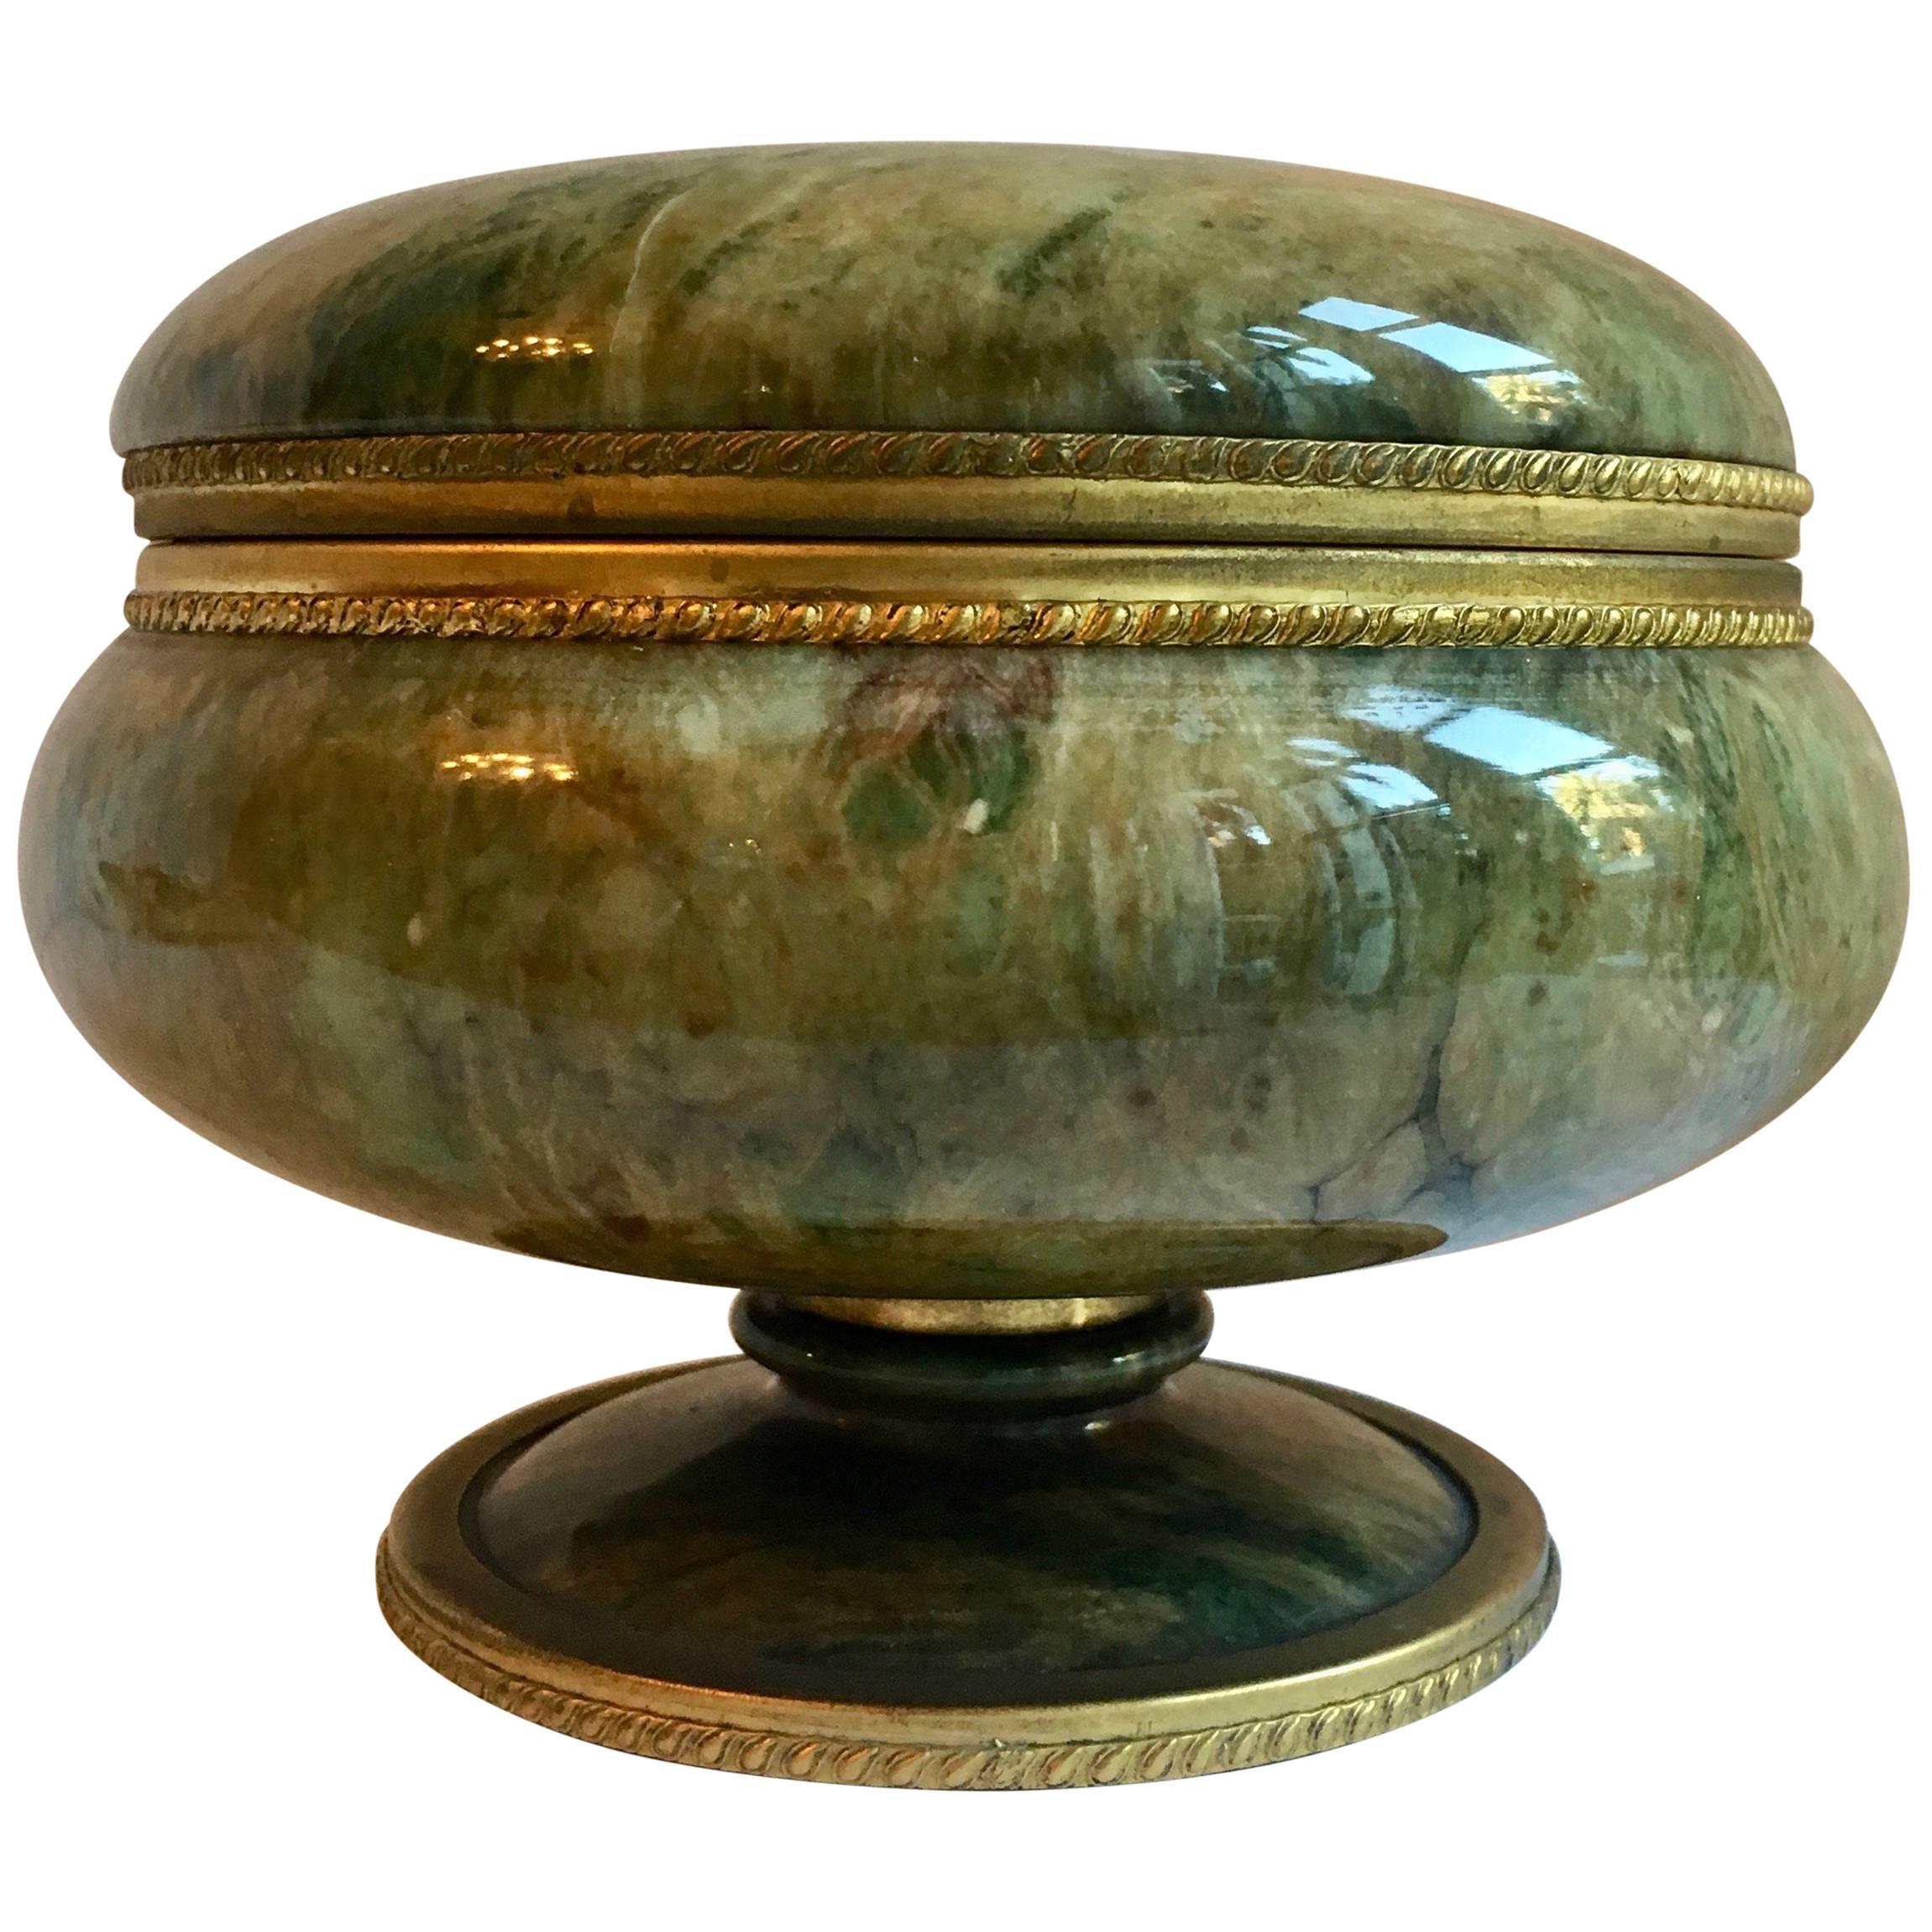 Footed Lidded Marble Vanity Jar with Brass Details